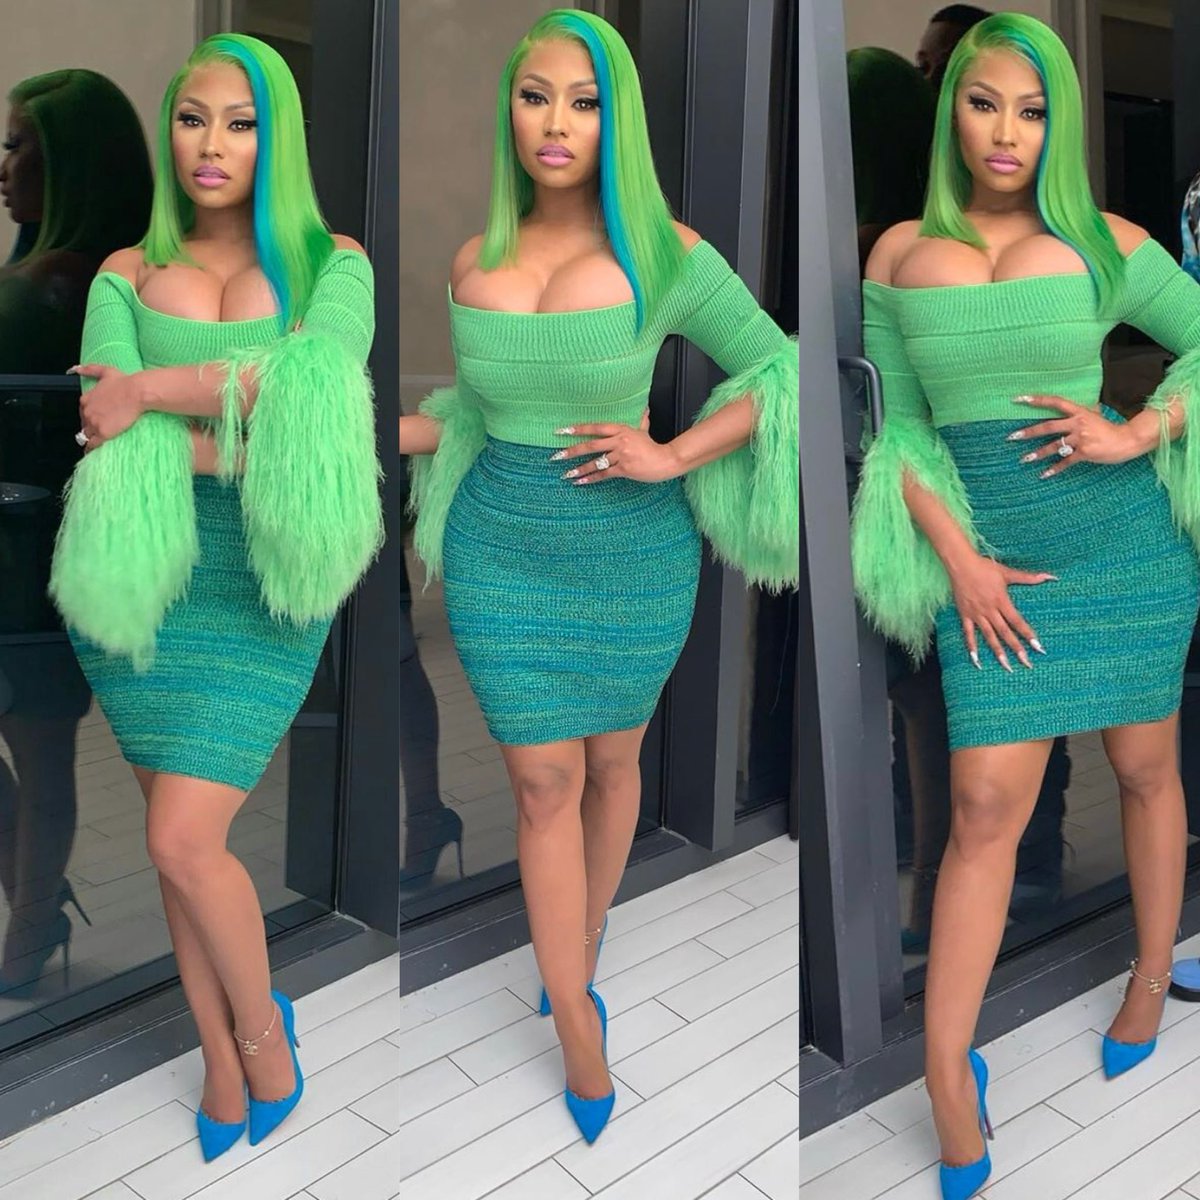 Nicki knew she chewed this look tf up